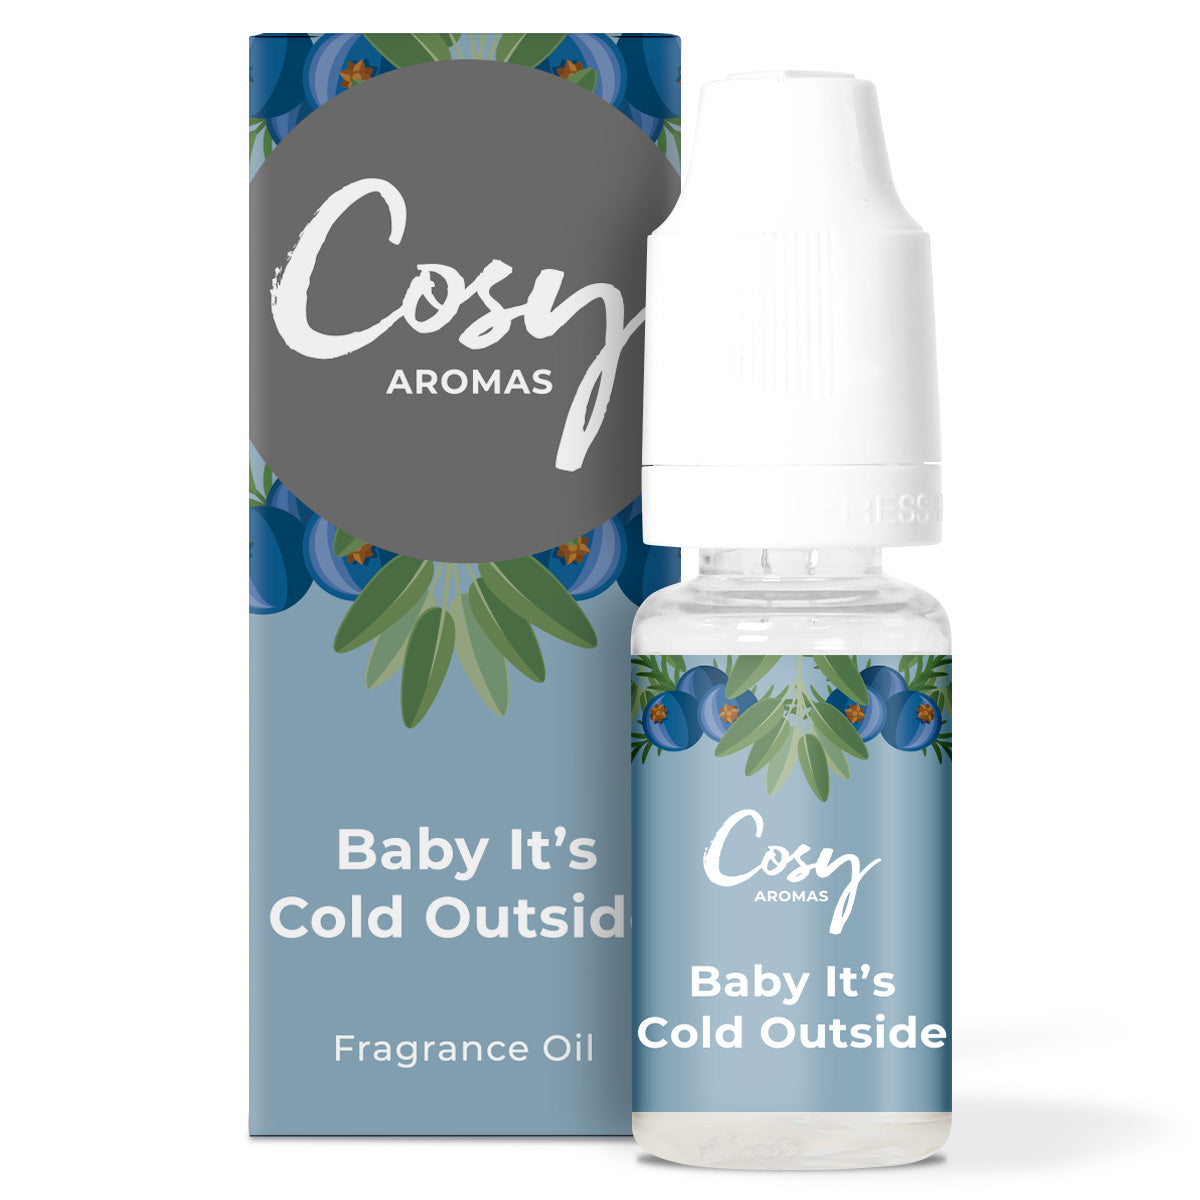 Baby It's Cold Outside Fragrance Oil.